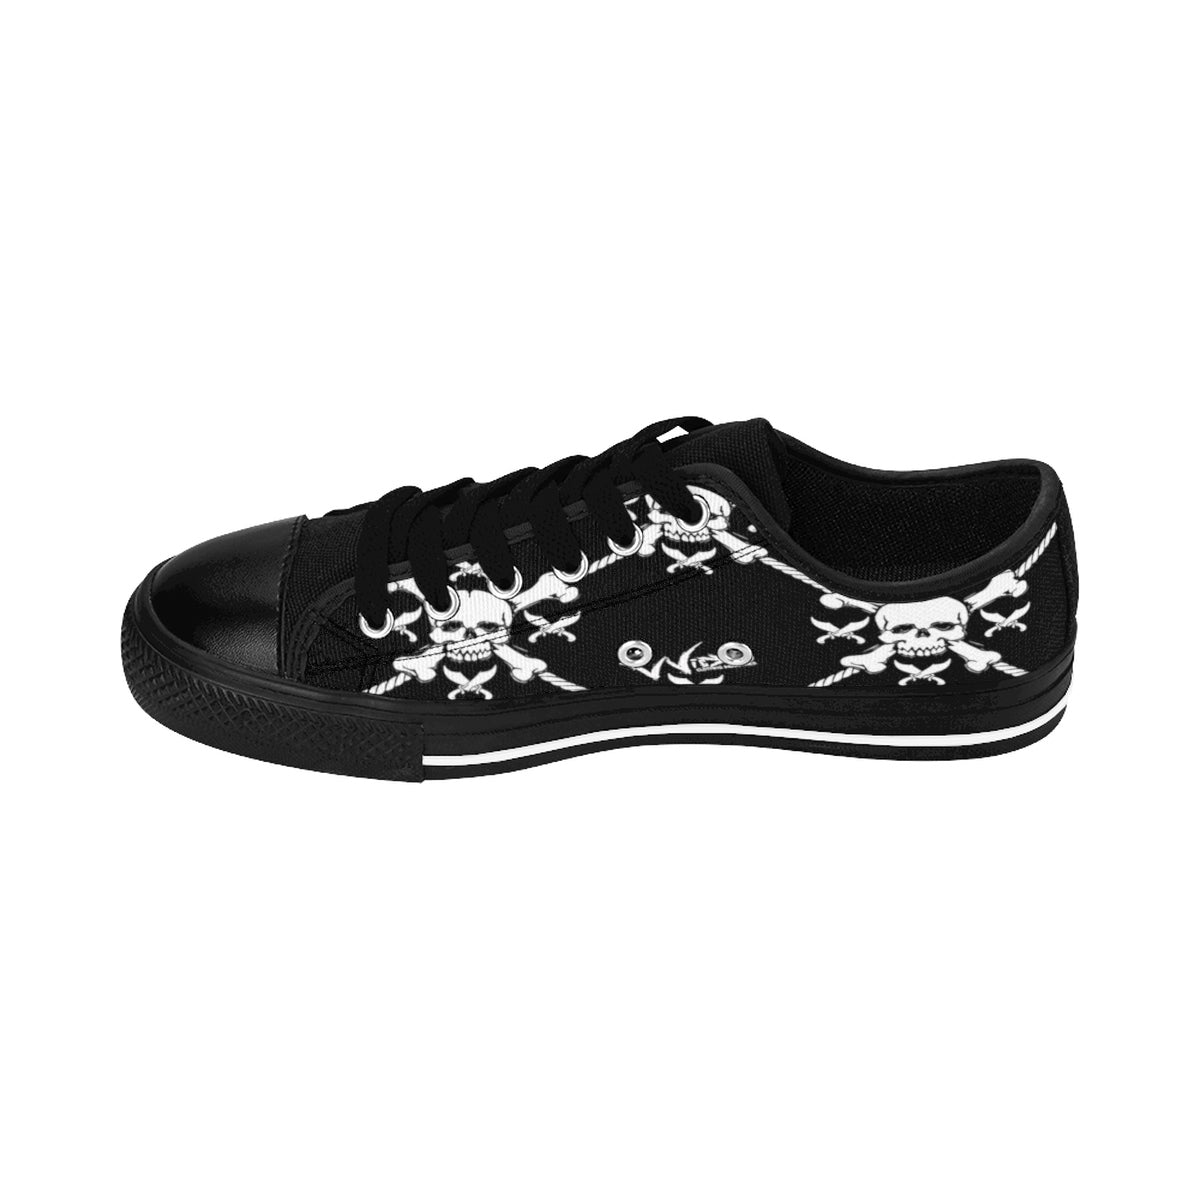 Women's Sneakers Wicked Pirate